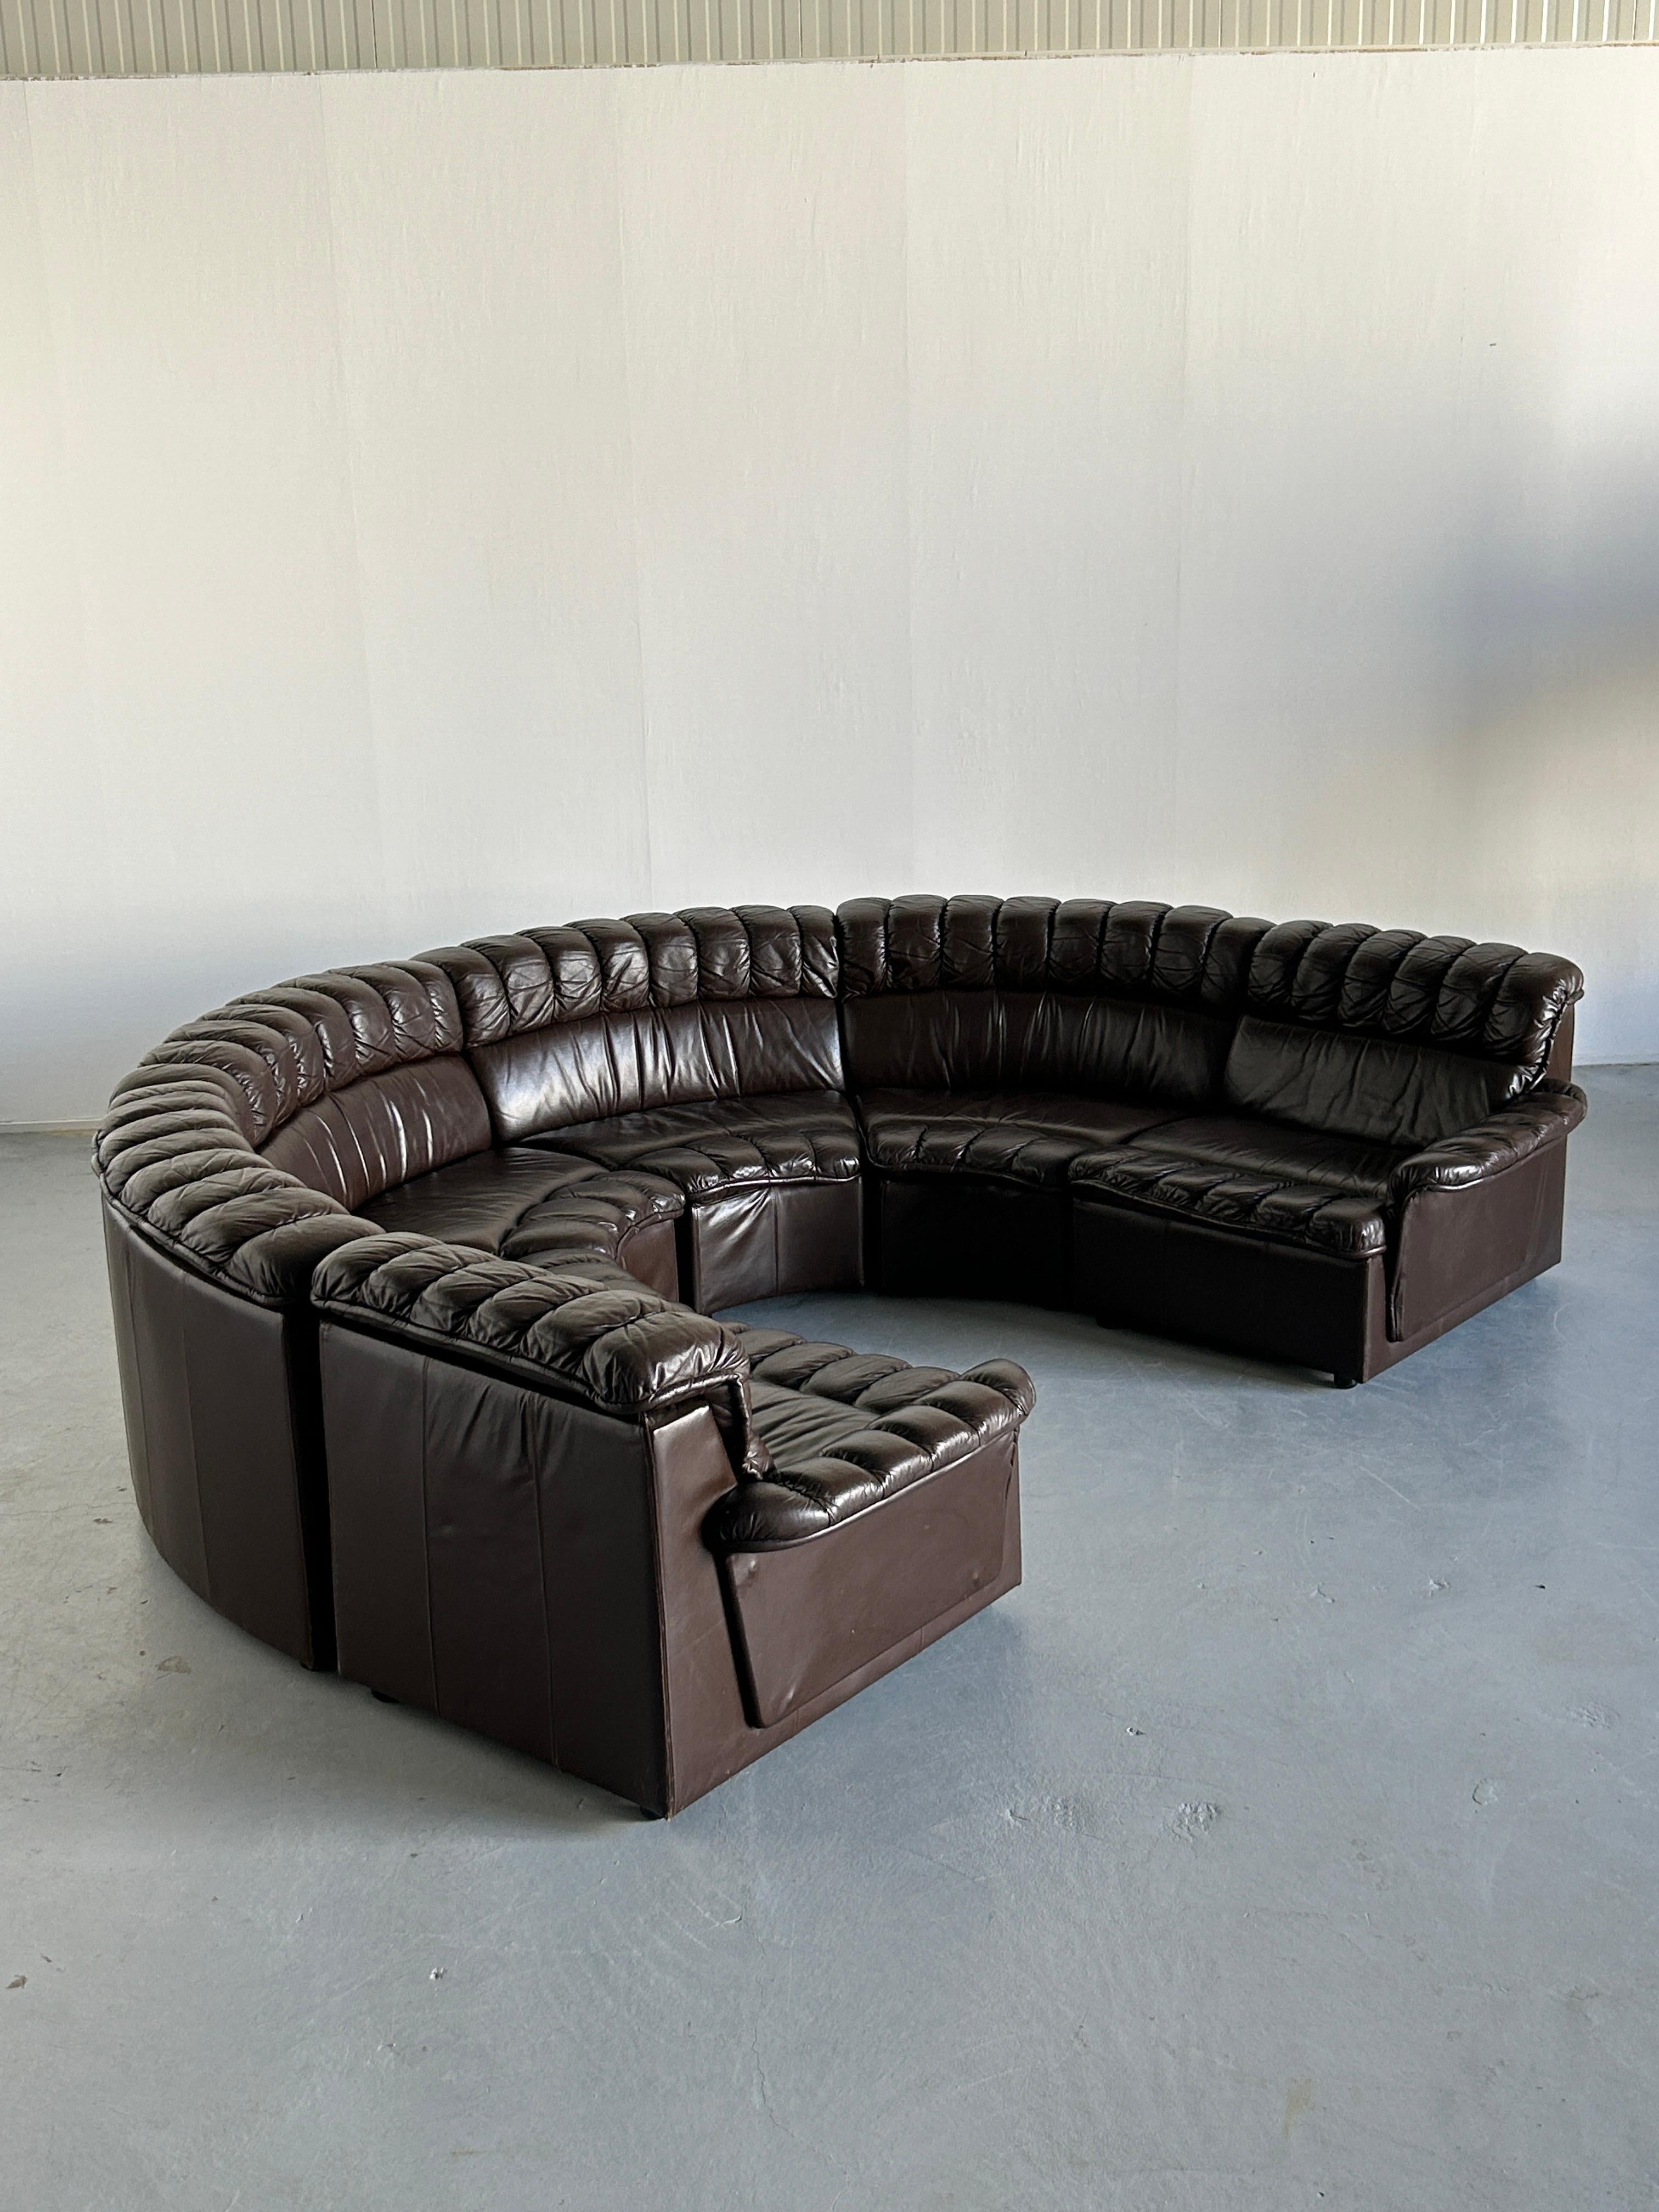 Mid-Century-Modern Leather Snake Sofa in style of De Sede DS-600 Non-Stop, 1970s For Sale 1